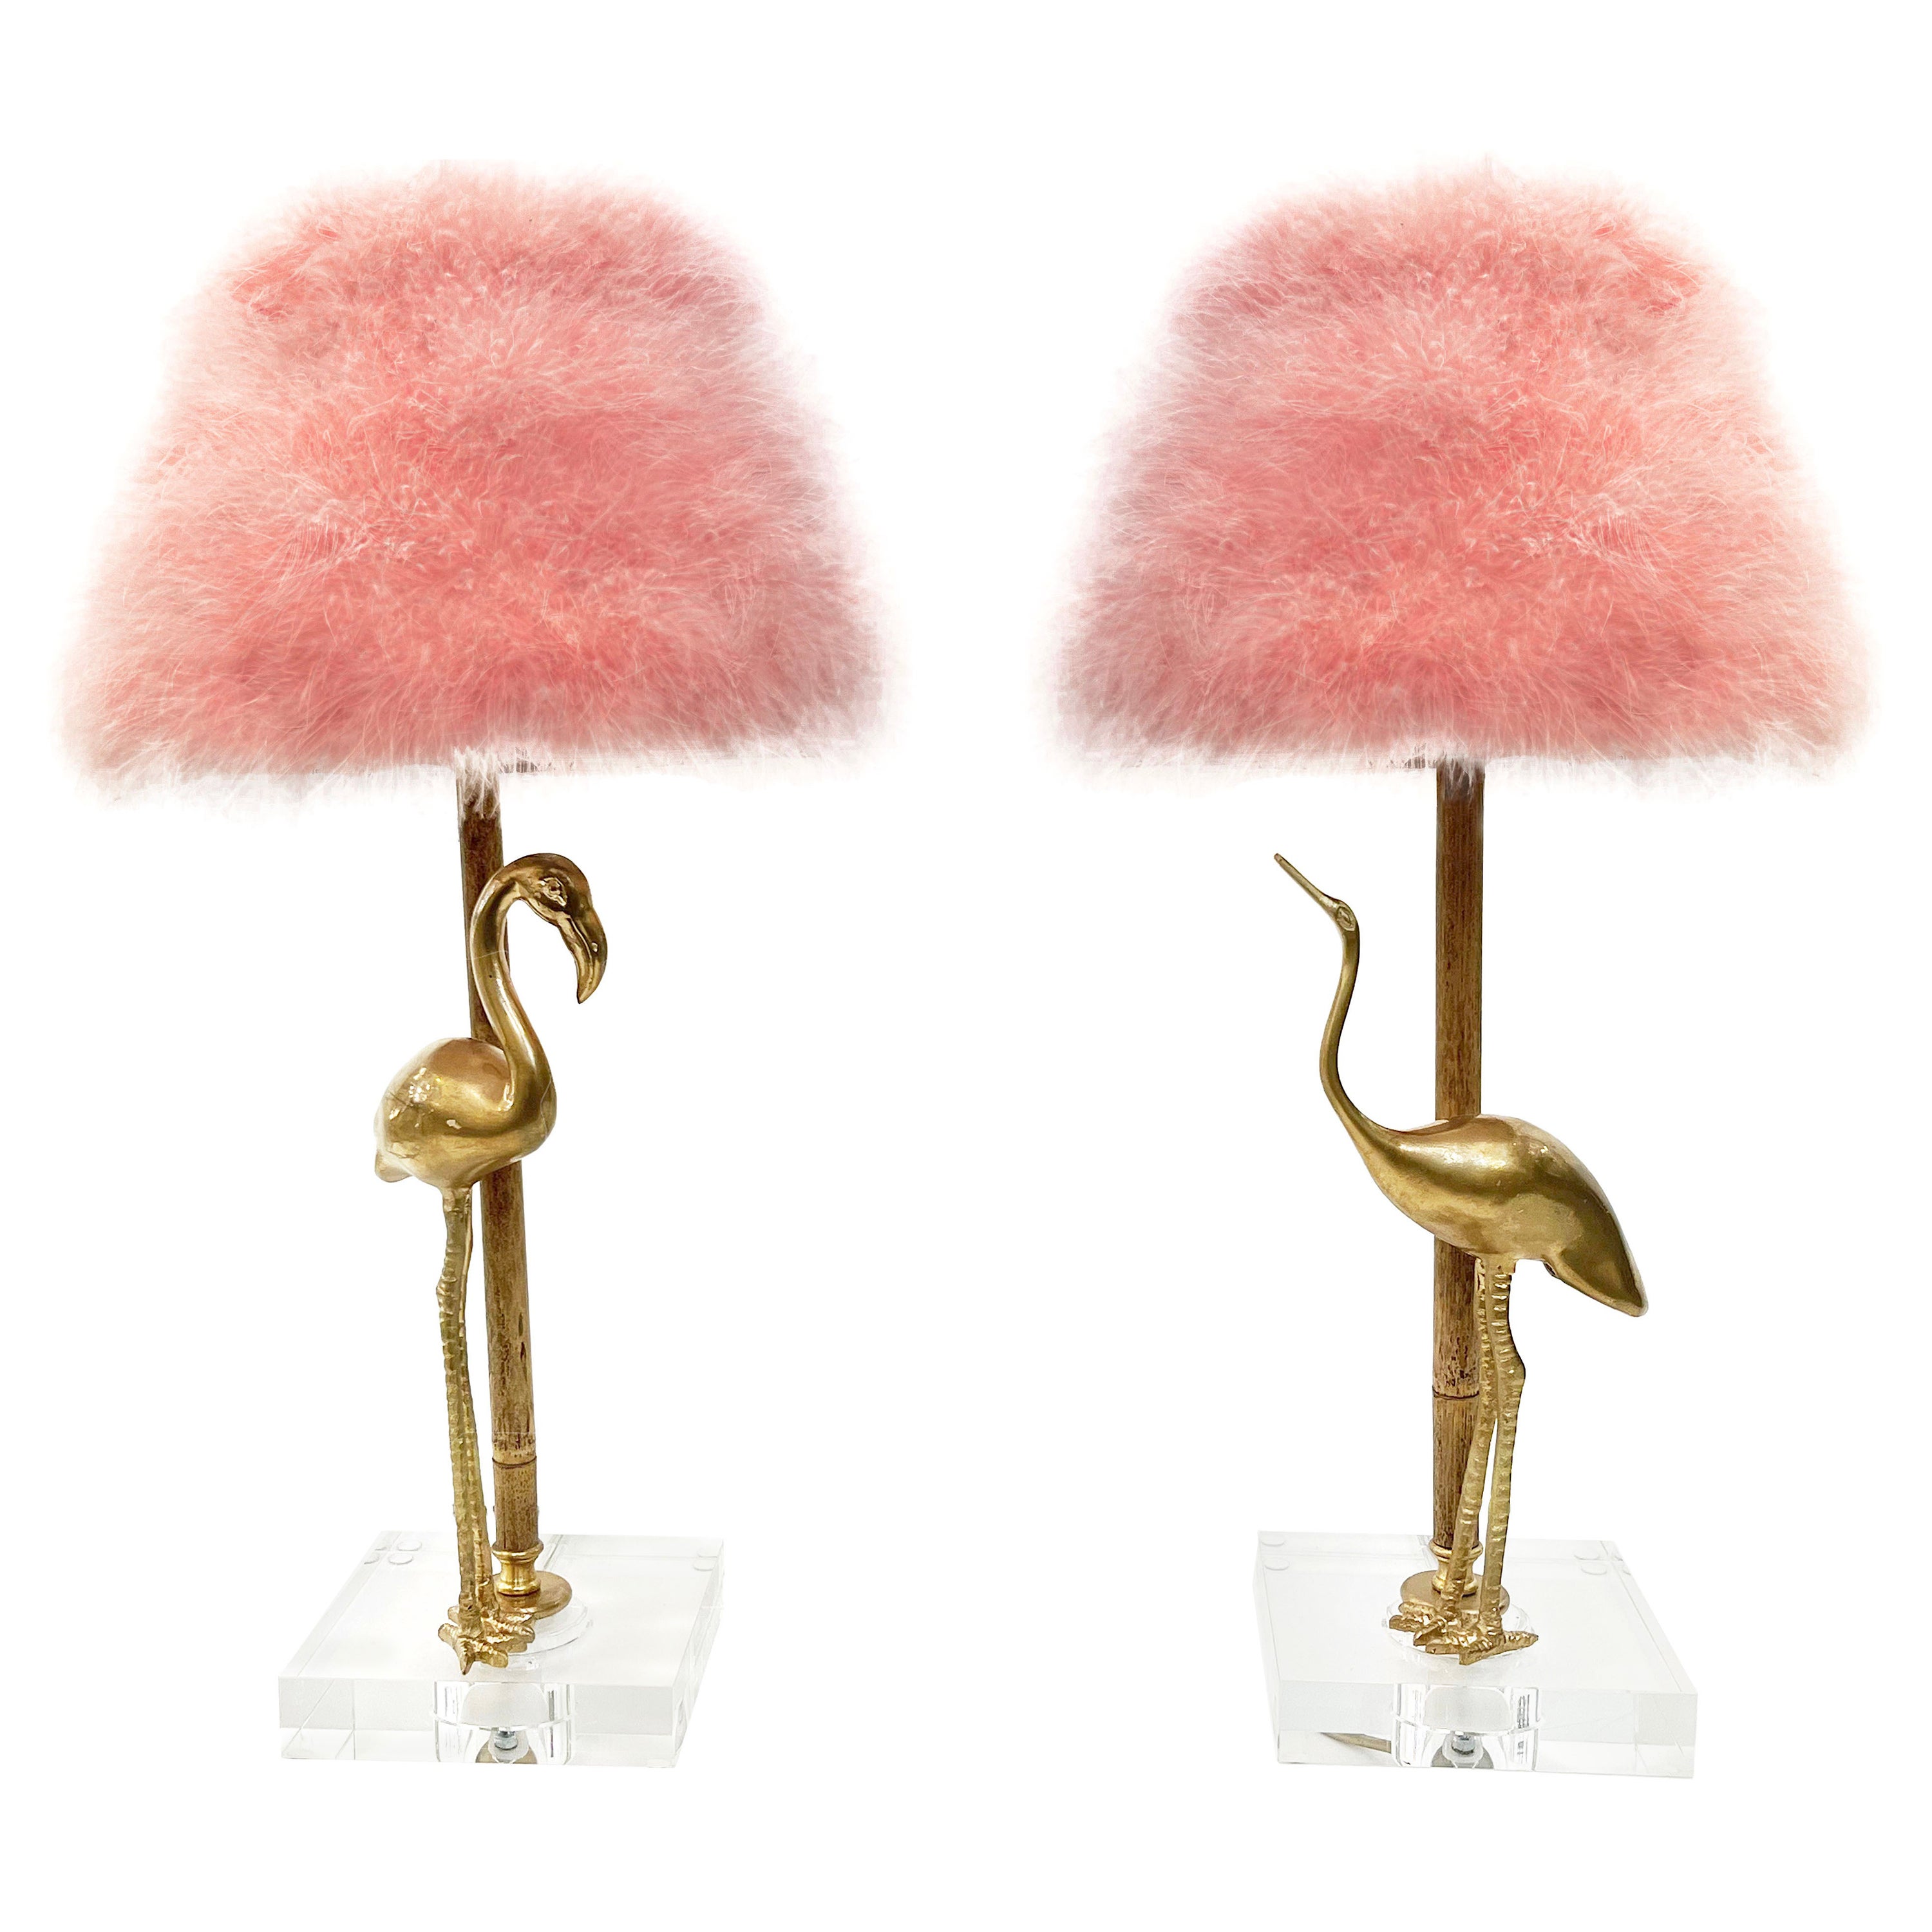 1970 Italian Vintage Pair of Brass Lucite Bamboo Table Lamps & Pink Fur Shades